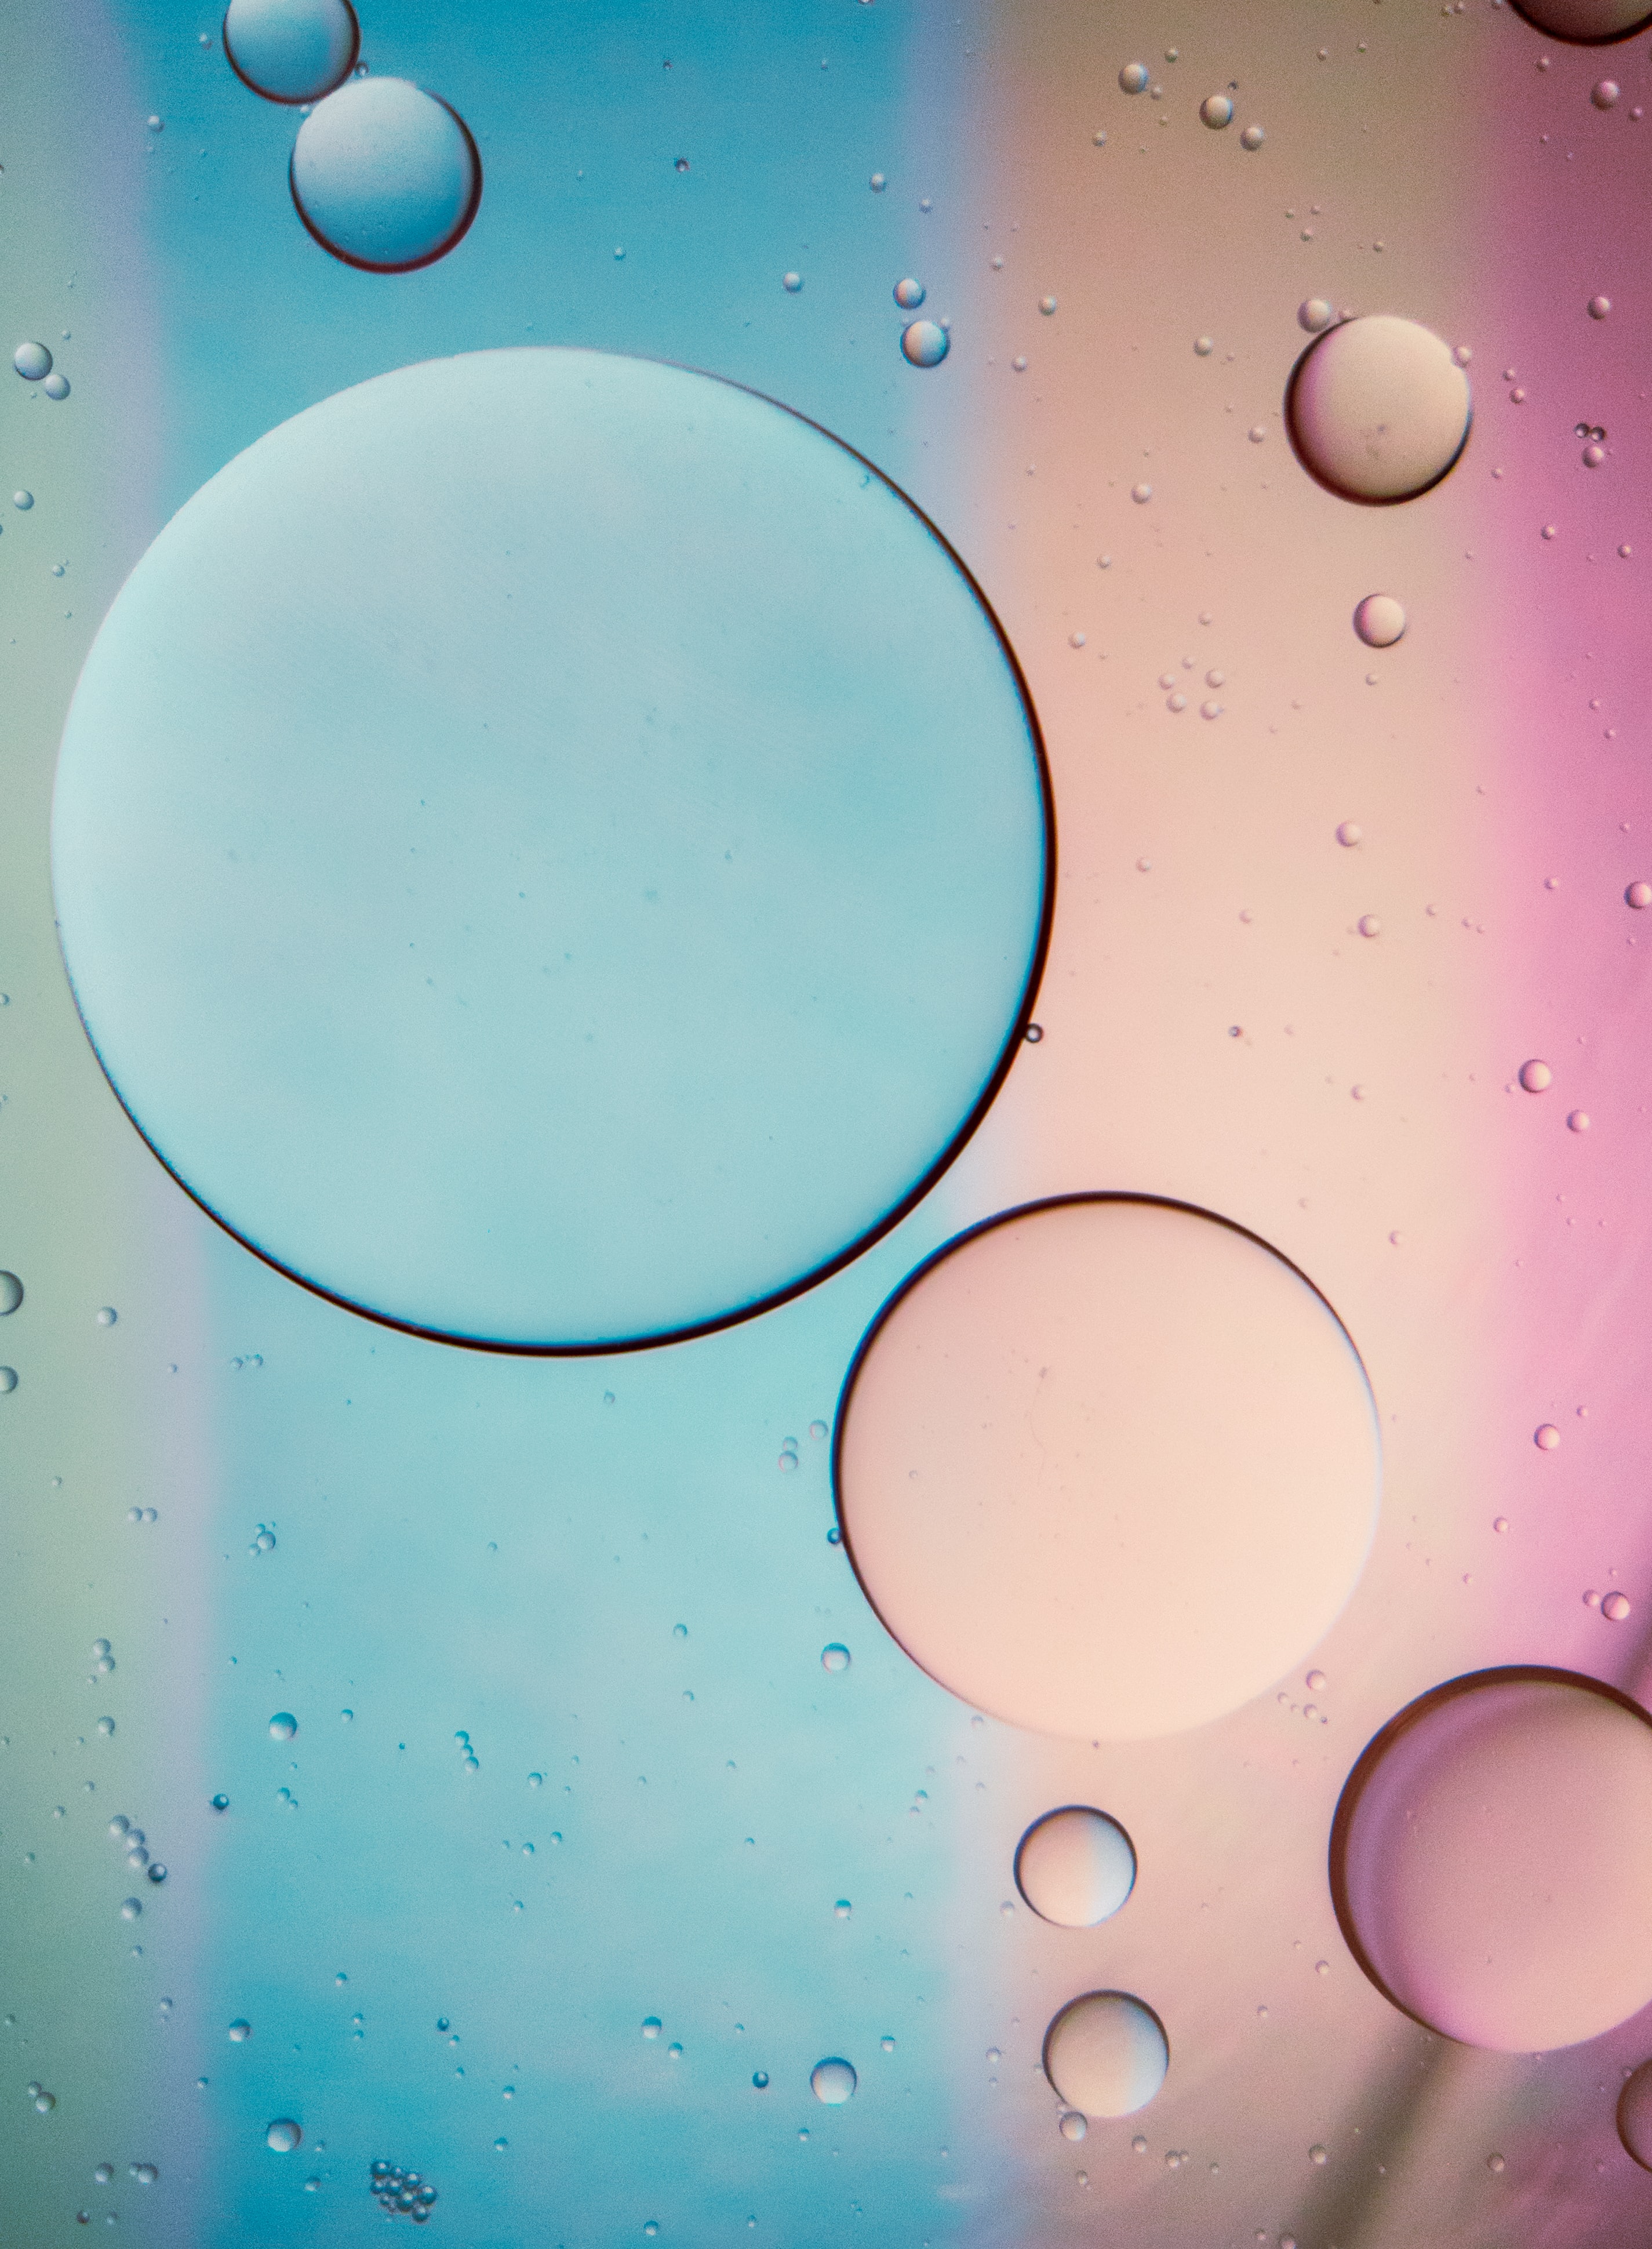 Popular Bubbles Image for Phone